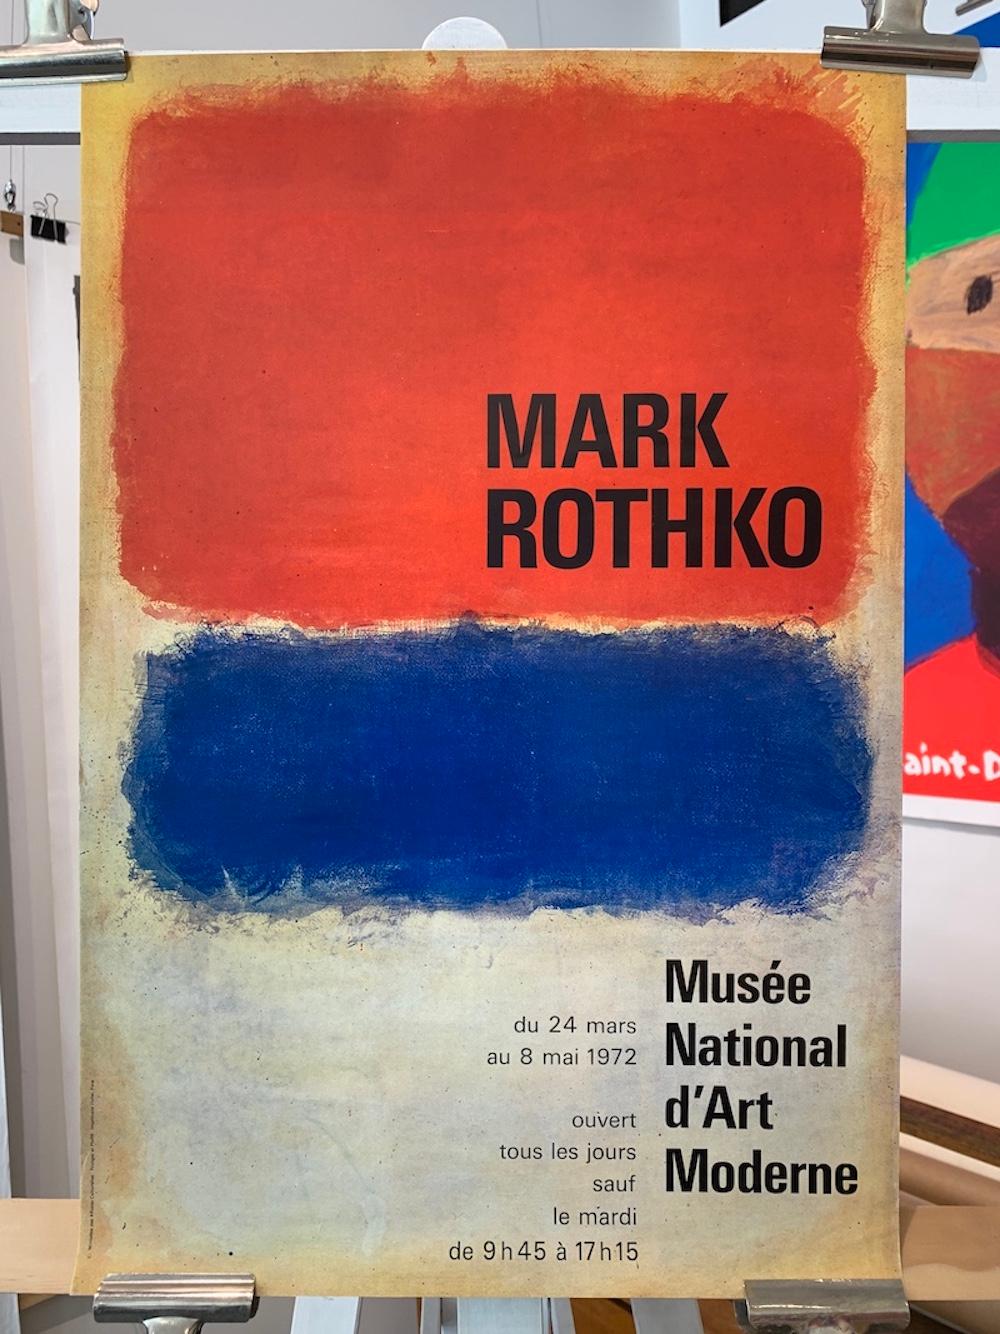 Mark Rothko, 'Musee National D'art Moderne' Original Vintage Exhibition Poster

CONDITION	
Good

ARTIST	
Mark Rothko

YEAR	
1972

DIMENSIONS	
60 x 40 cm

